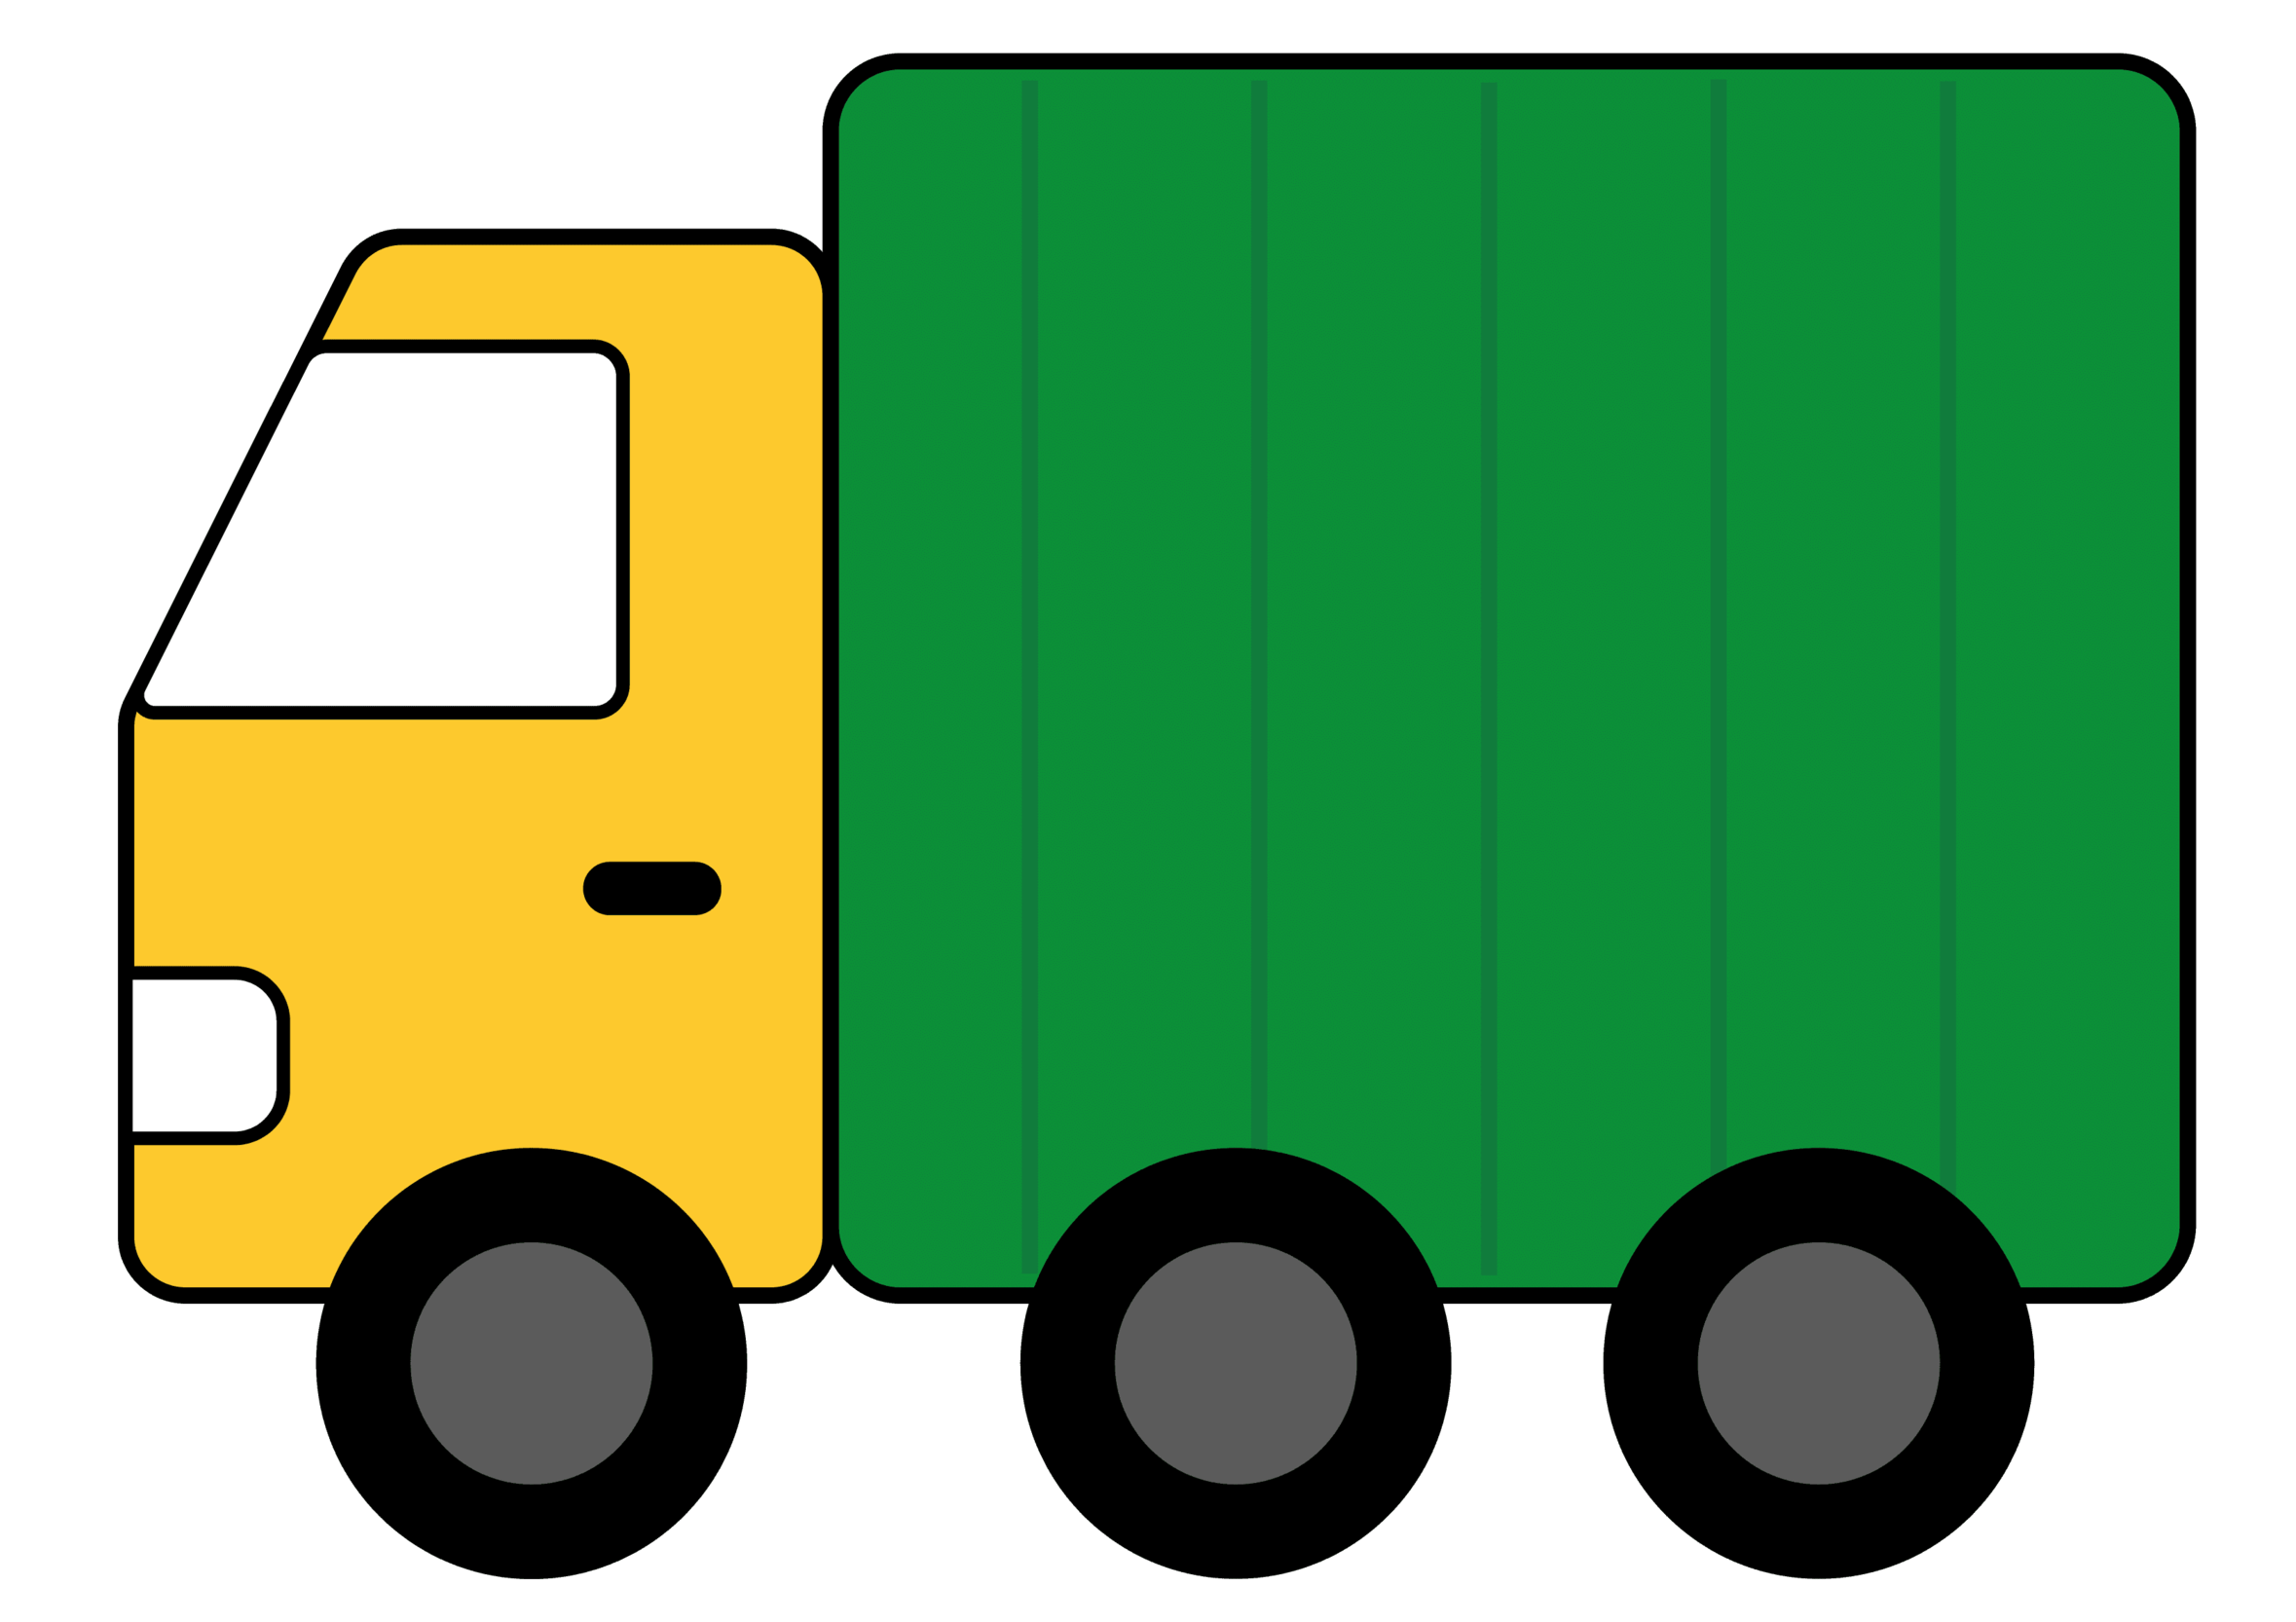 Truck clipart truck free imag